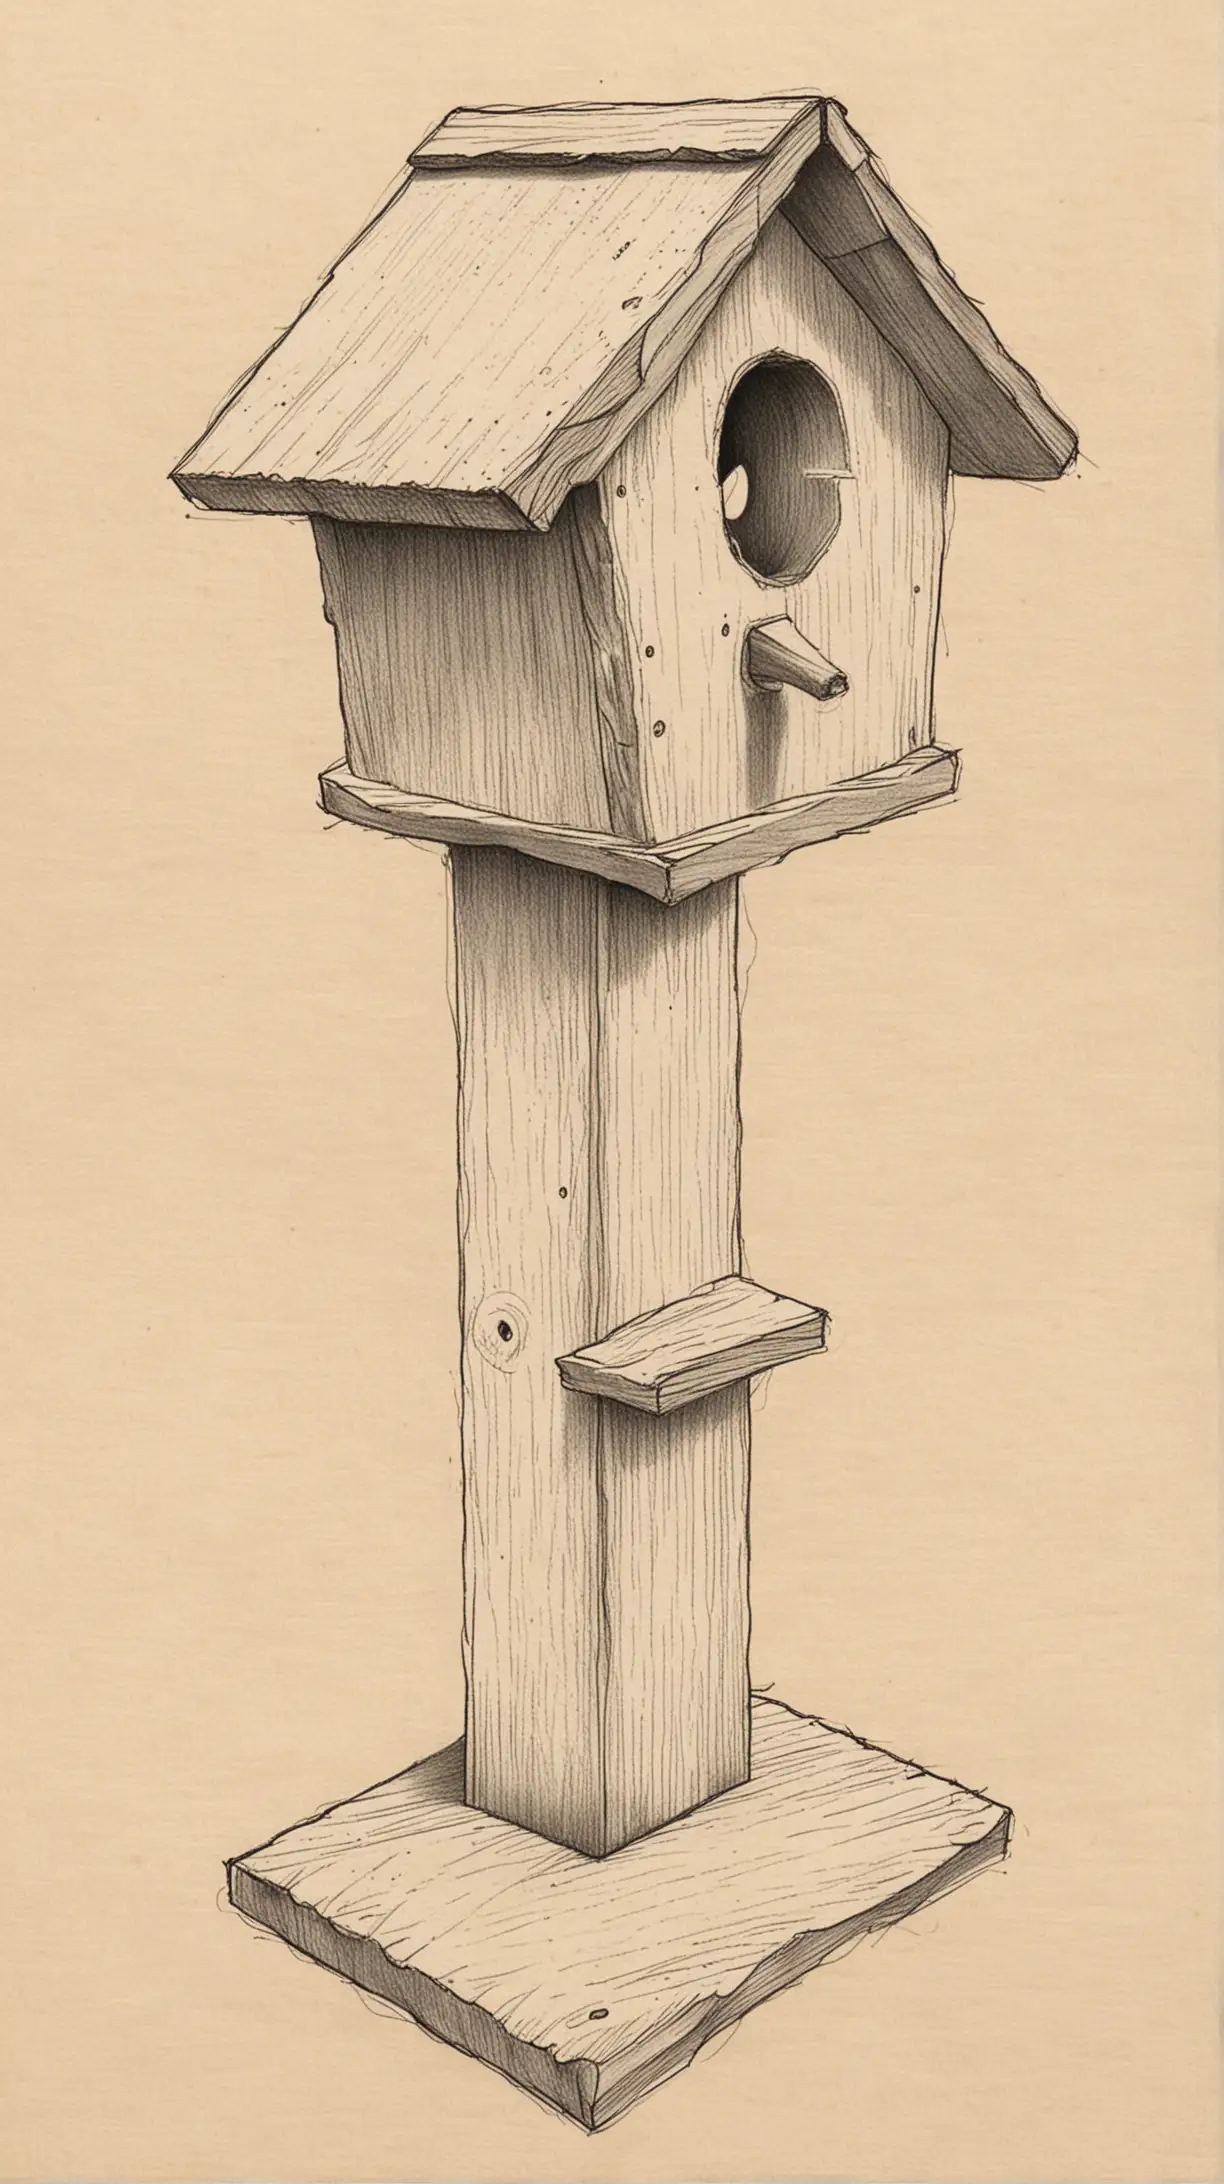 StepbyStep Guide to Building a Birdhouse in Perspective Sketch